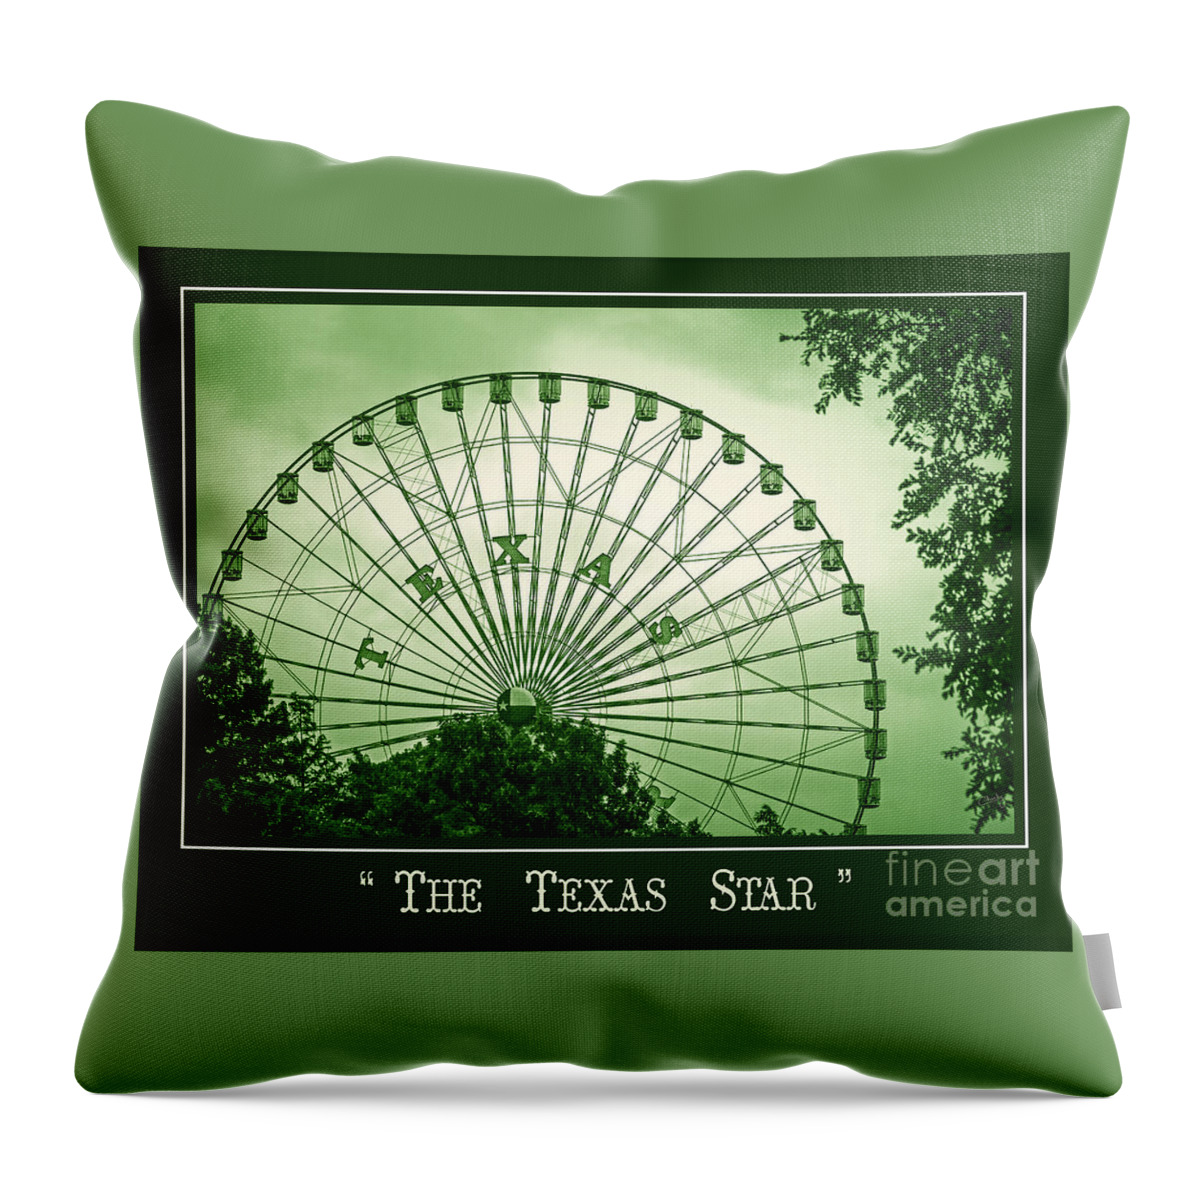 Texas Star Ferris Wheel Throw Pillow featuring the photograph Texas Star in Green by Imagery by Charly